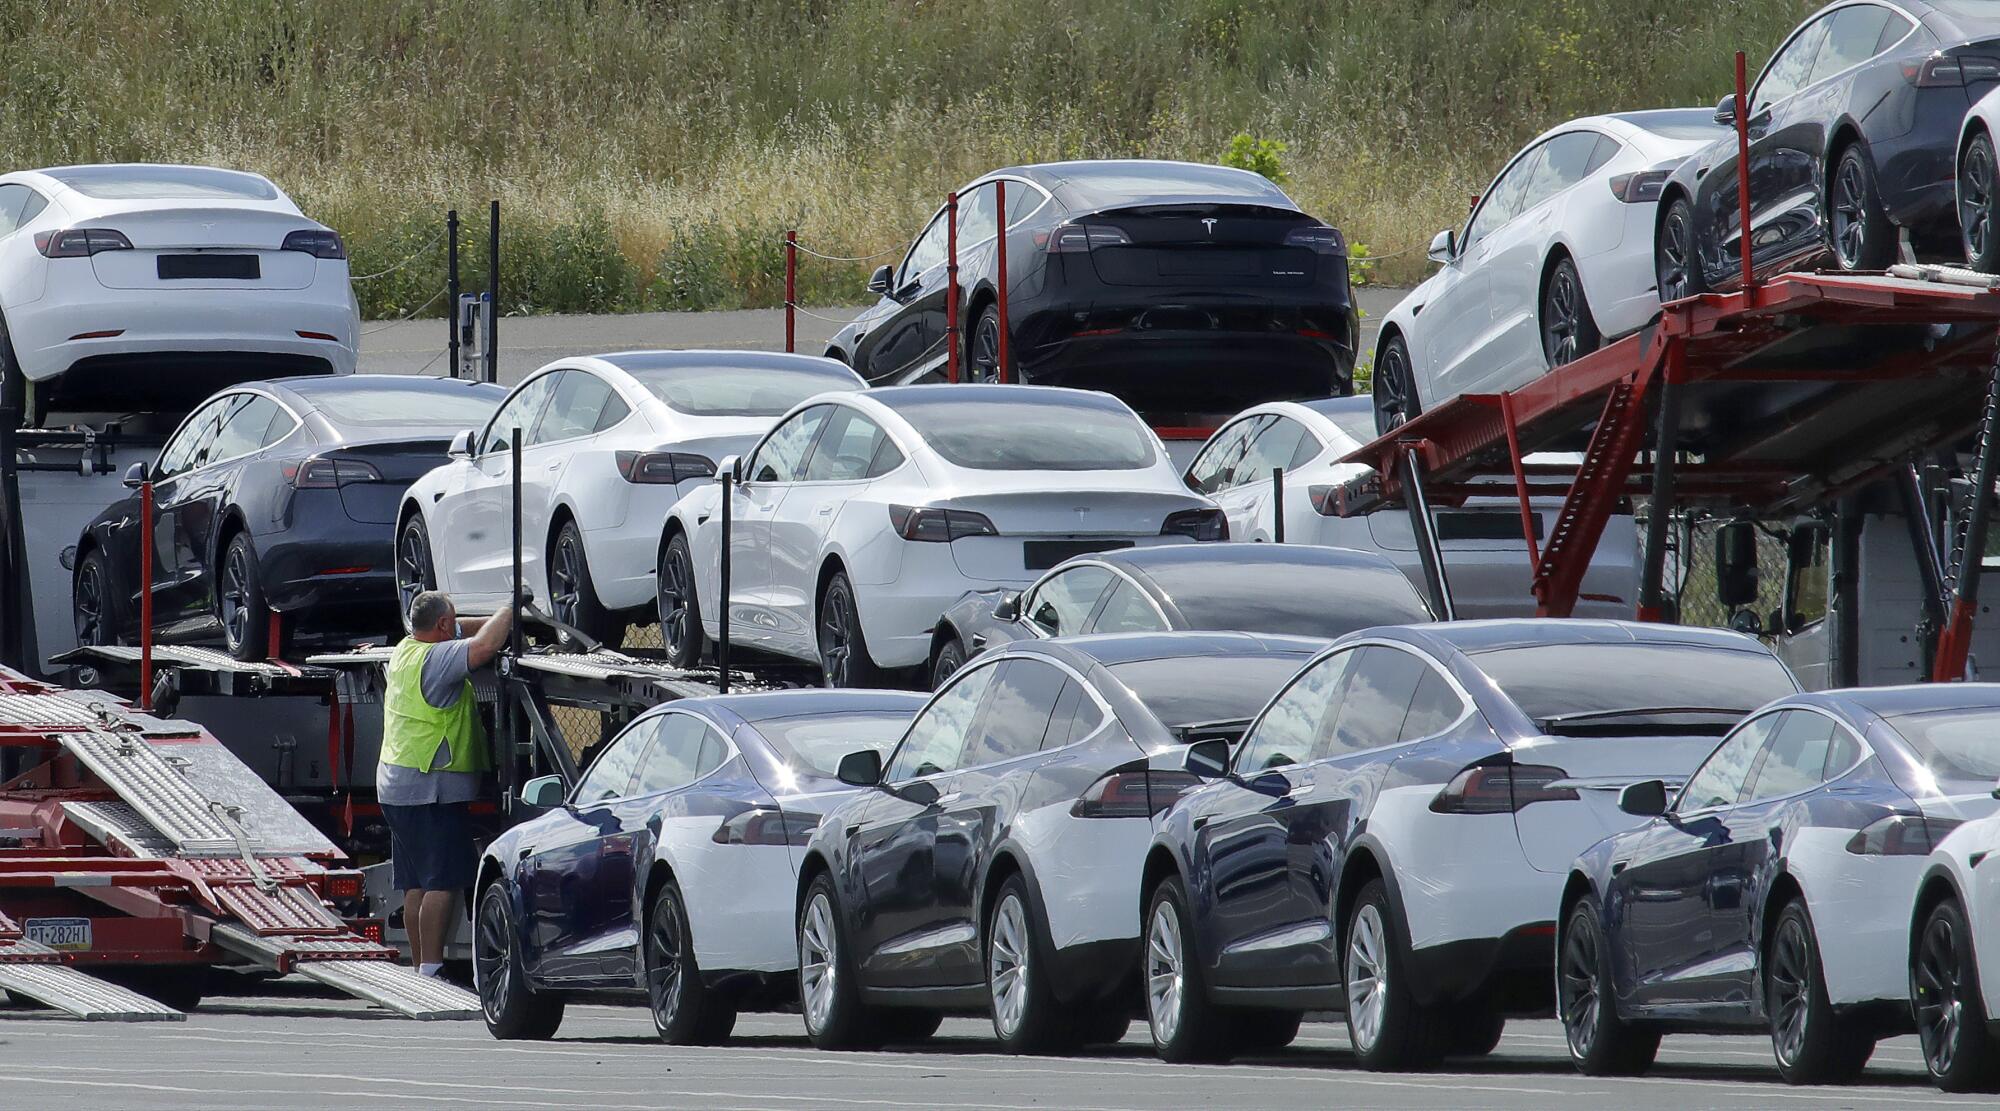 Tesla cars are loaded onto carriers at the Tesla electric car plant in Fremont, Calif.